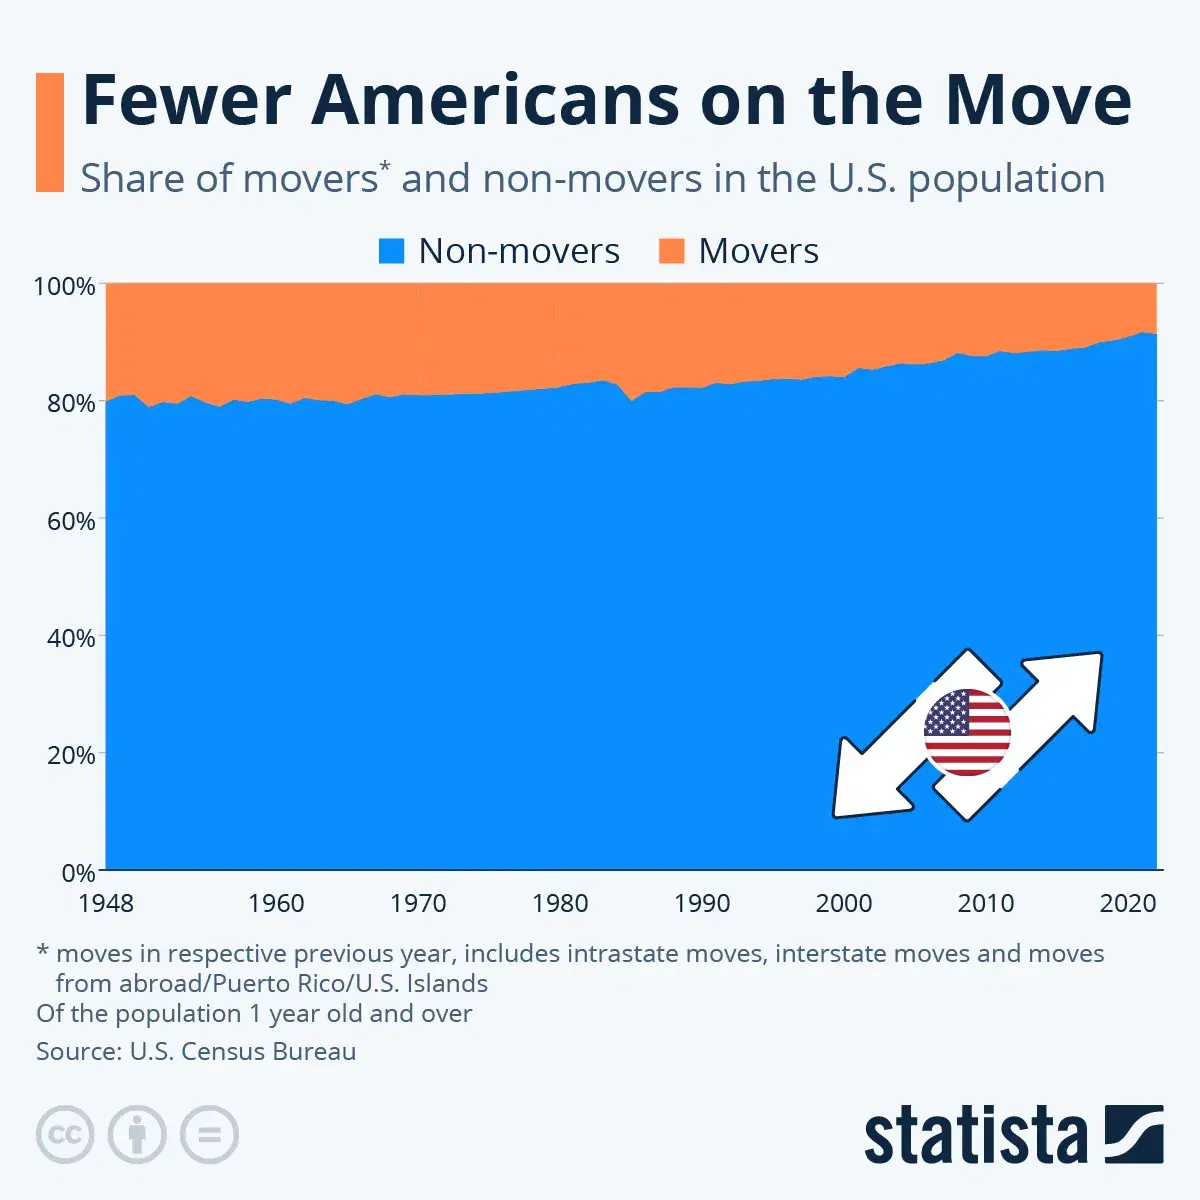 Fewer Americans on the Move